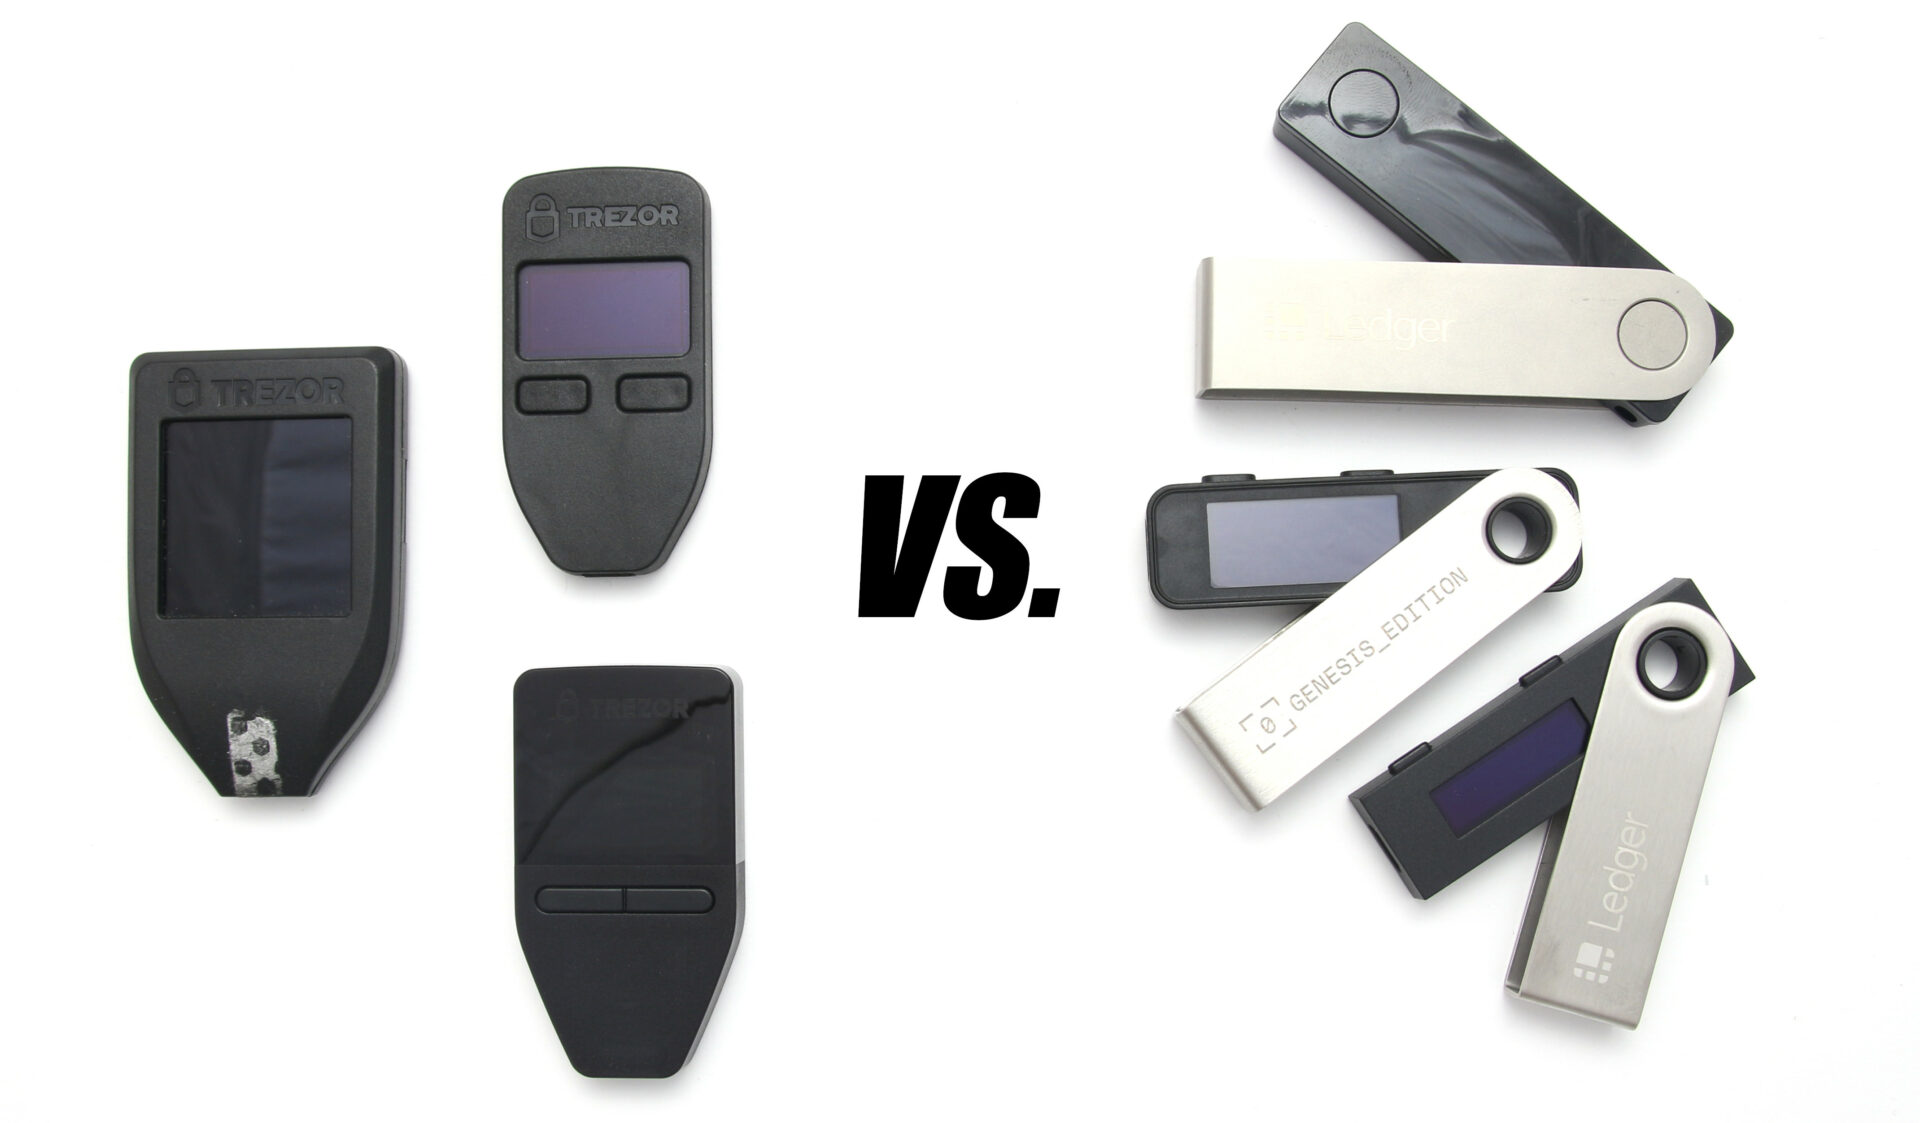 Trezor vs Ledger: Which Wallet is Right For You in ?